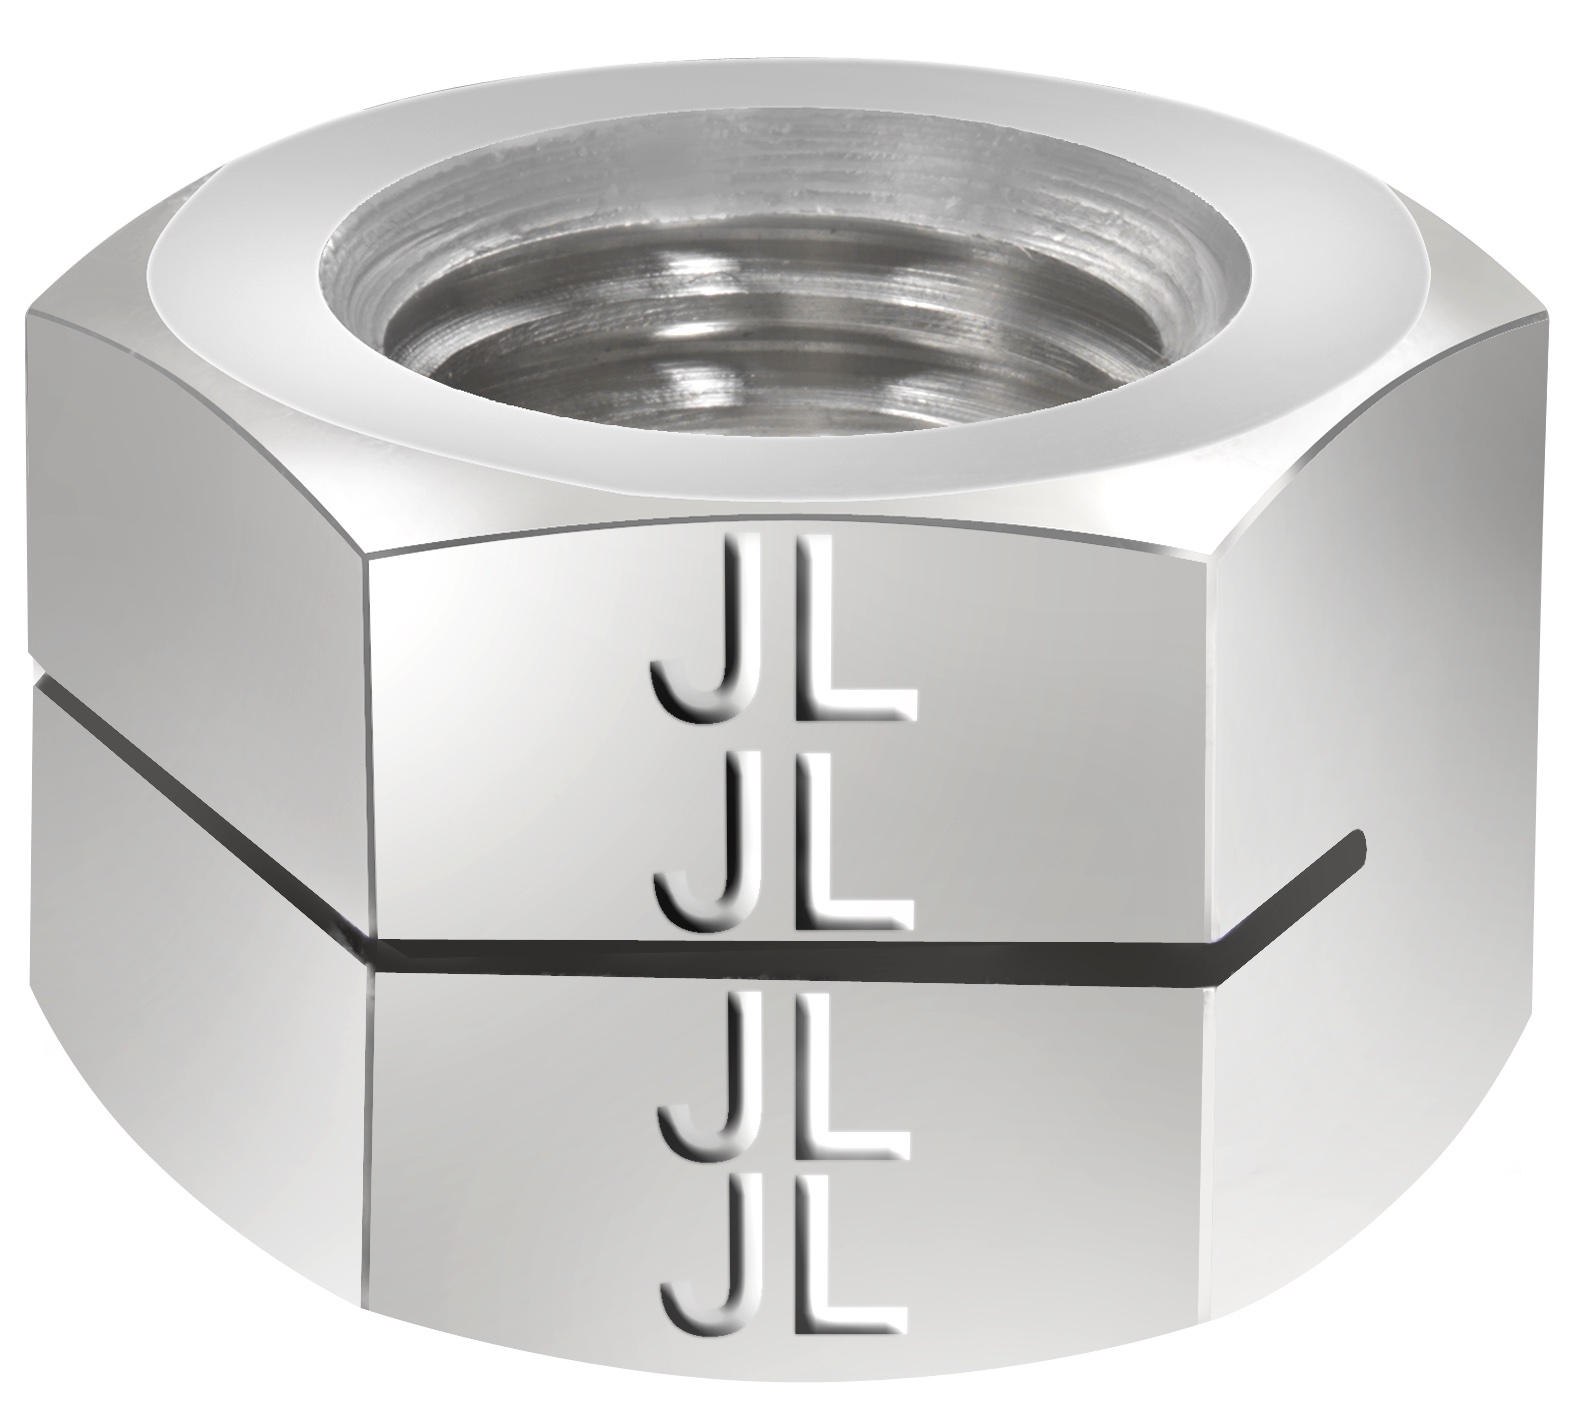 The HCE nut is an all metal self-locking jam nut capable of withstanding high temperatures